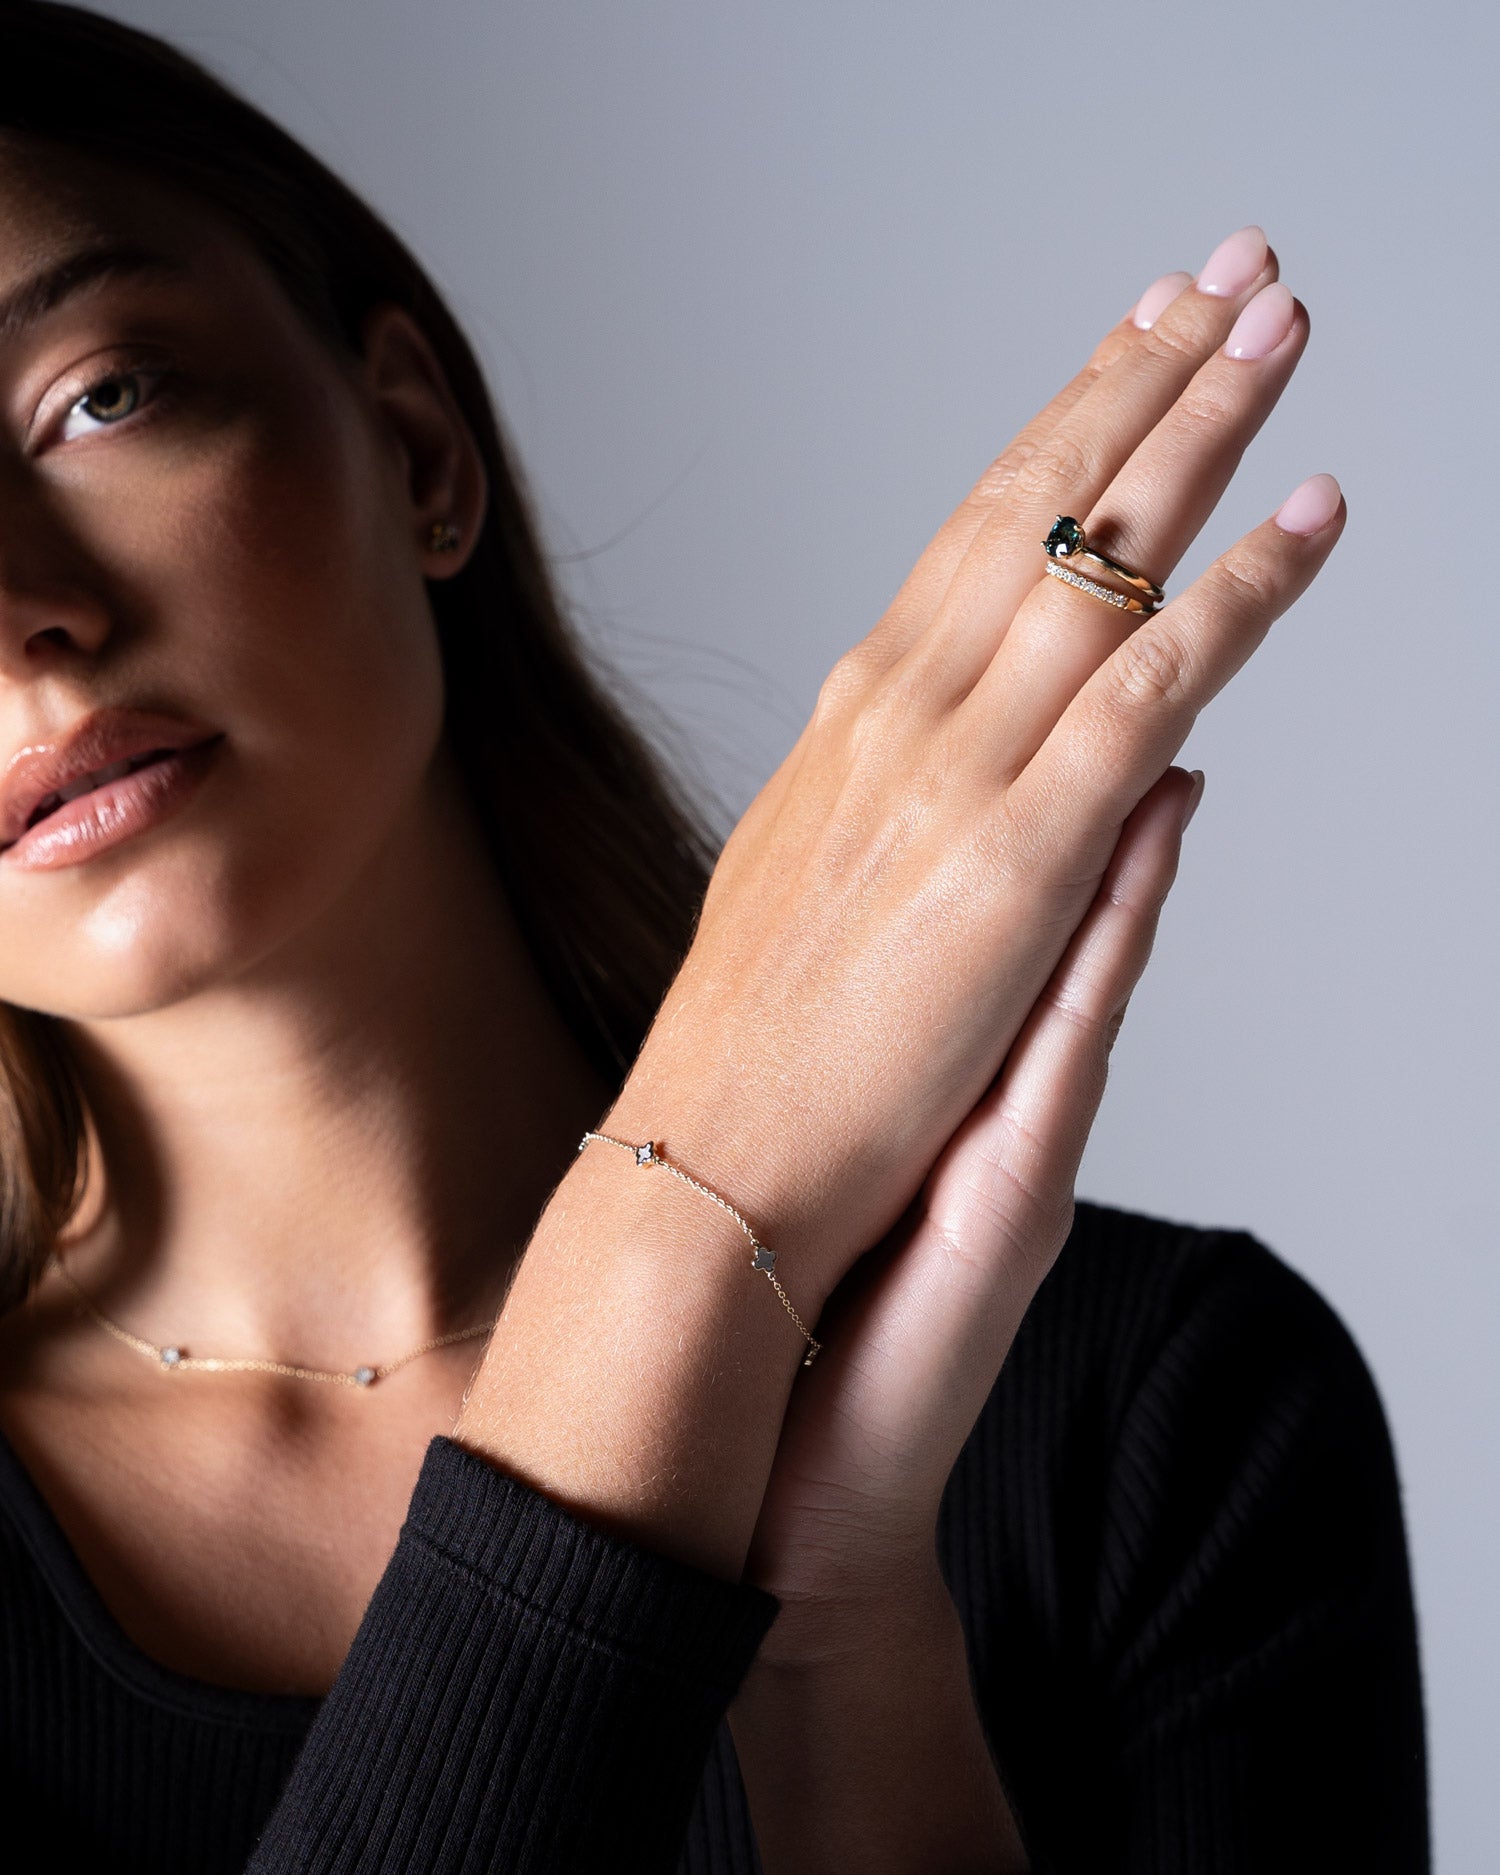 fine clover bracelet and sapphire engagement ring collection worn by Ellie Brinkman